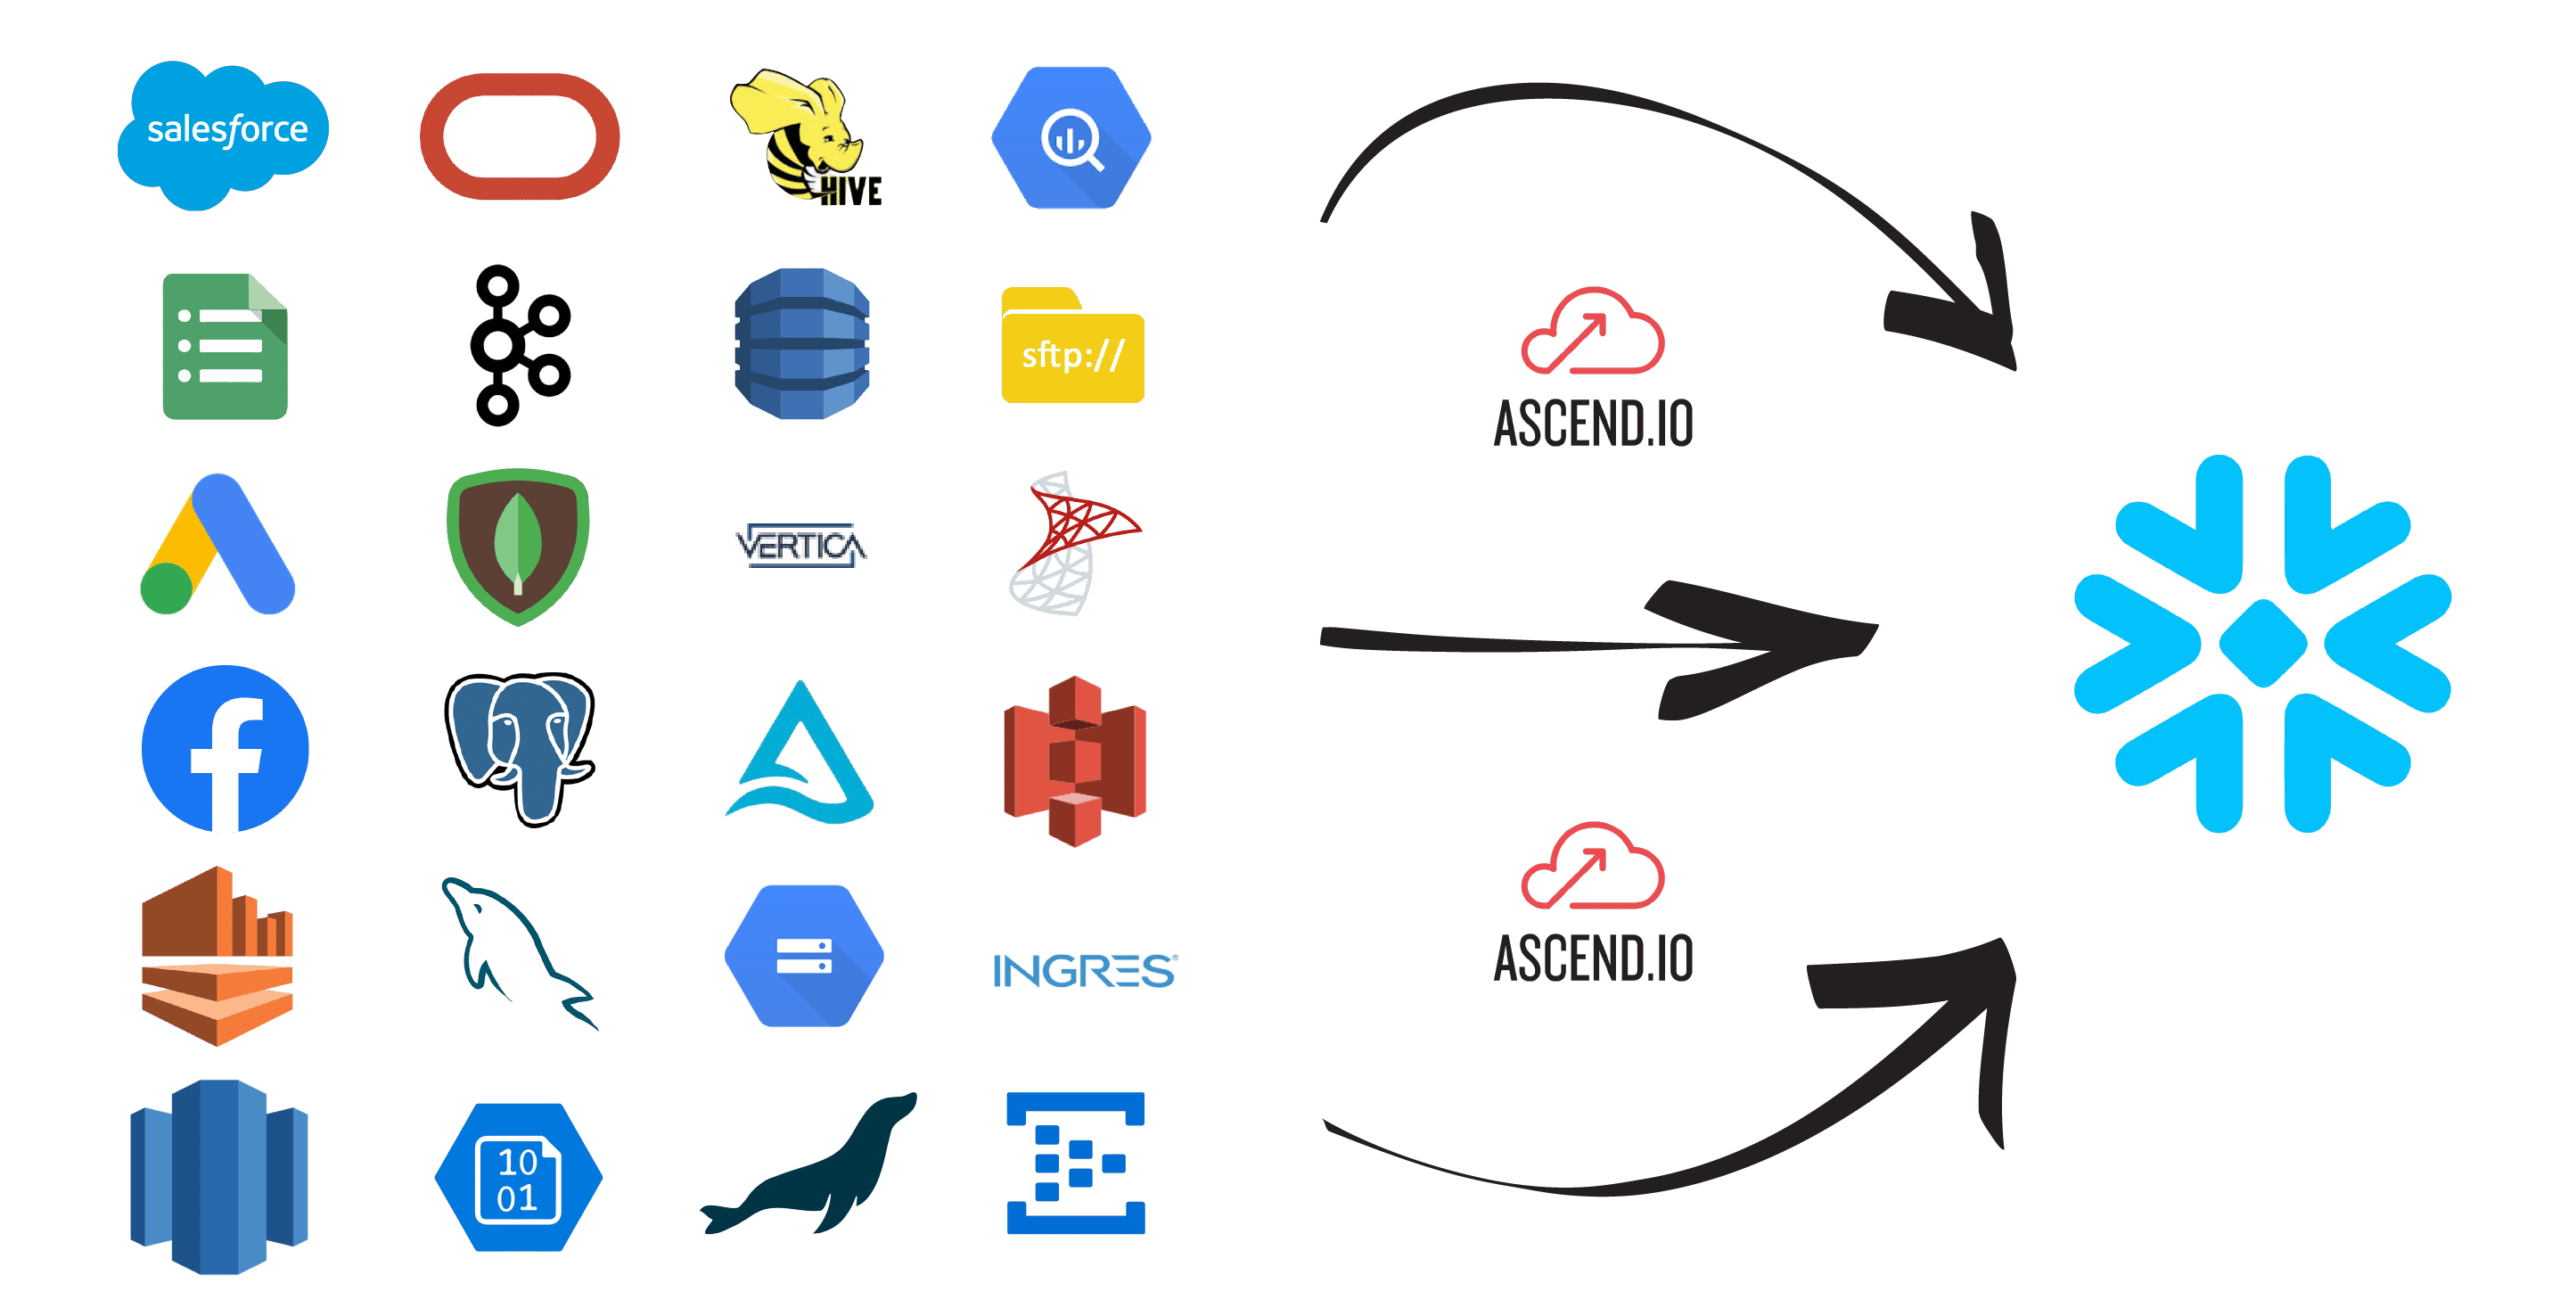 Ascend.io Launches Solution in Partnership with Snowflake, Enabling Cost Savings for Data Teams